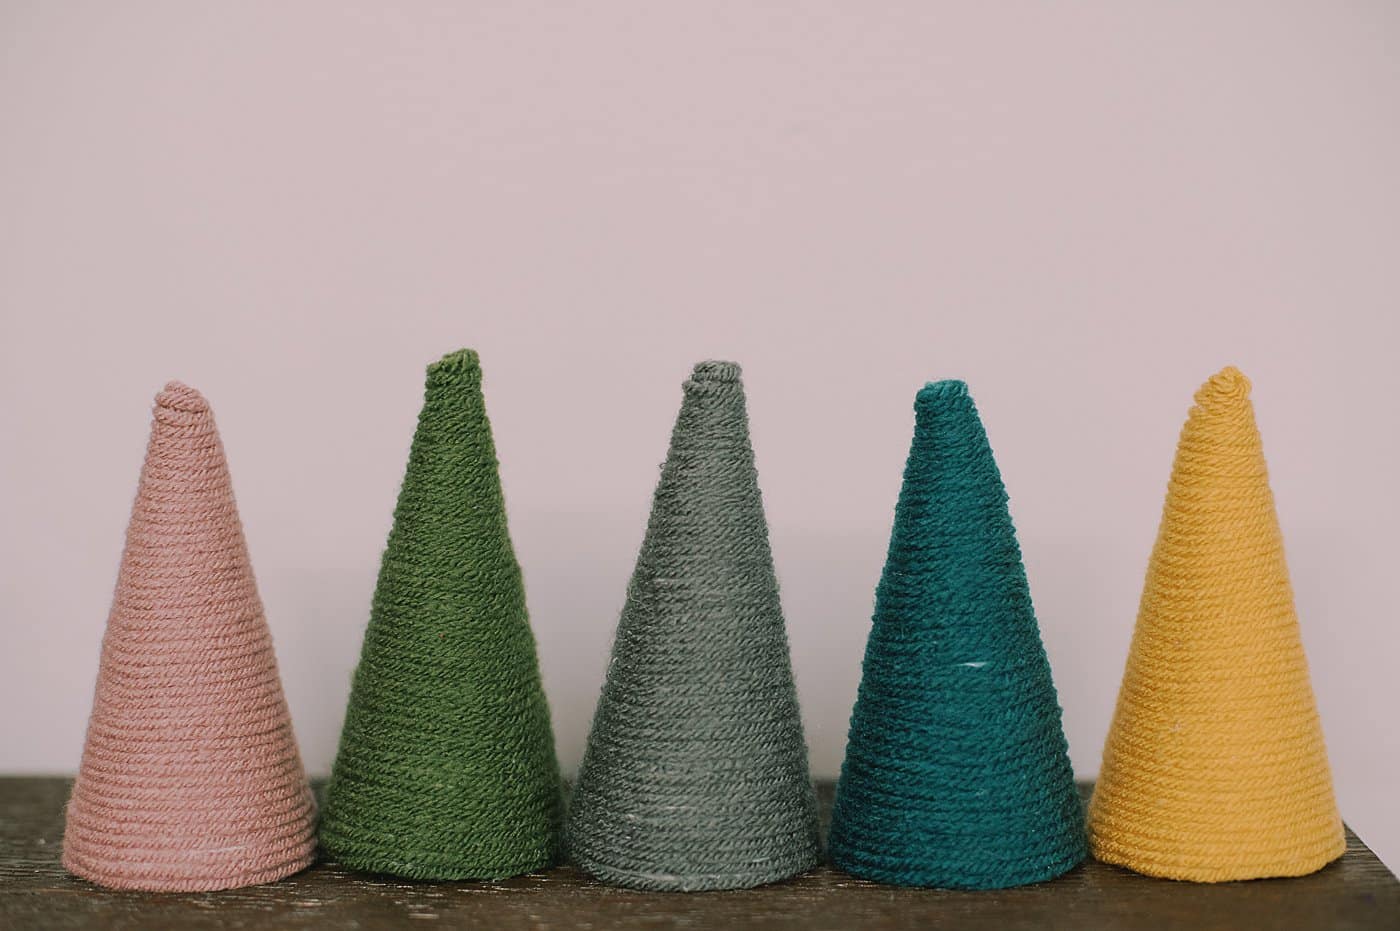 How to make yarn cone trees for Christmas by wrapping styrofoam cones with yarn.